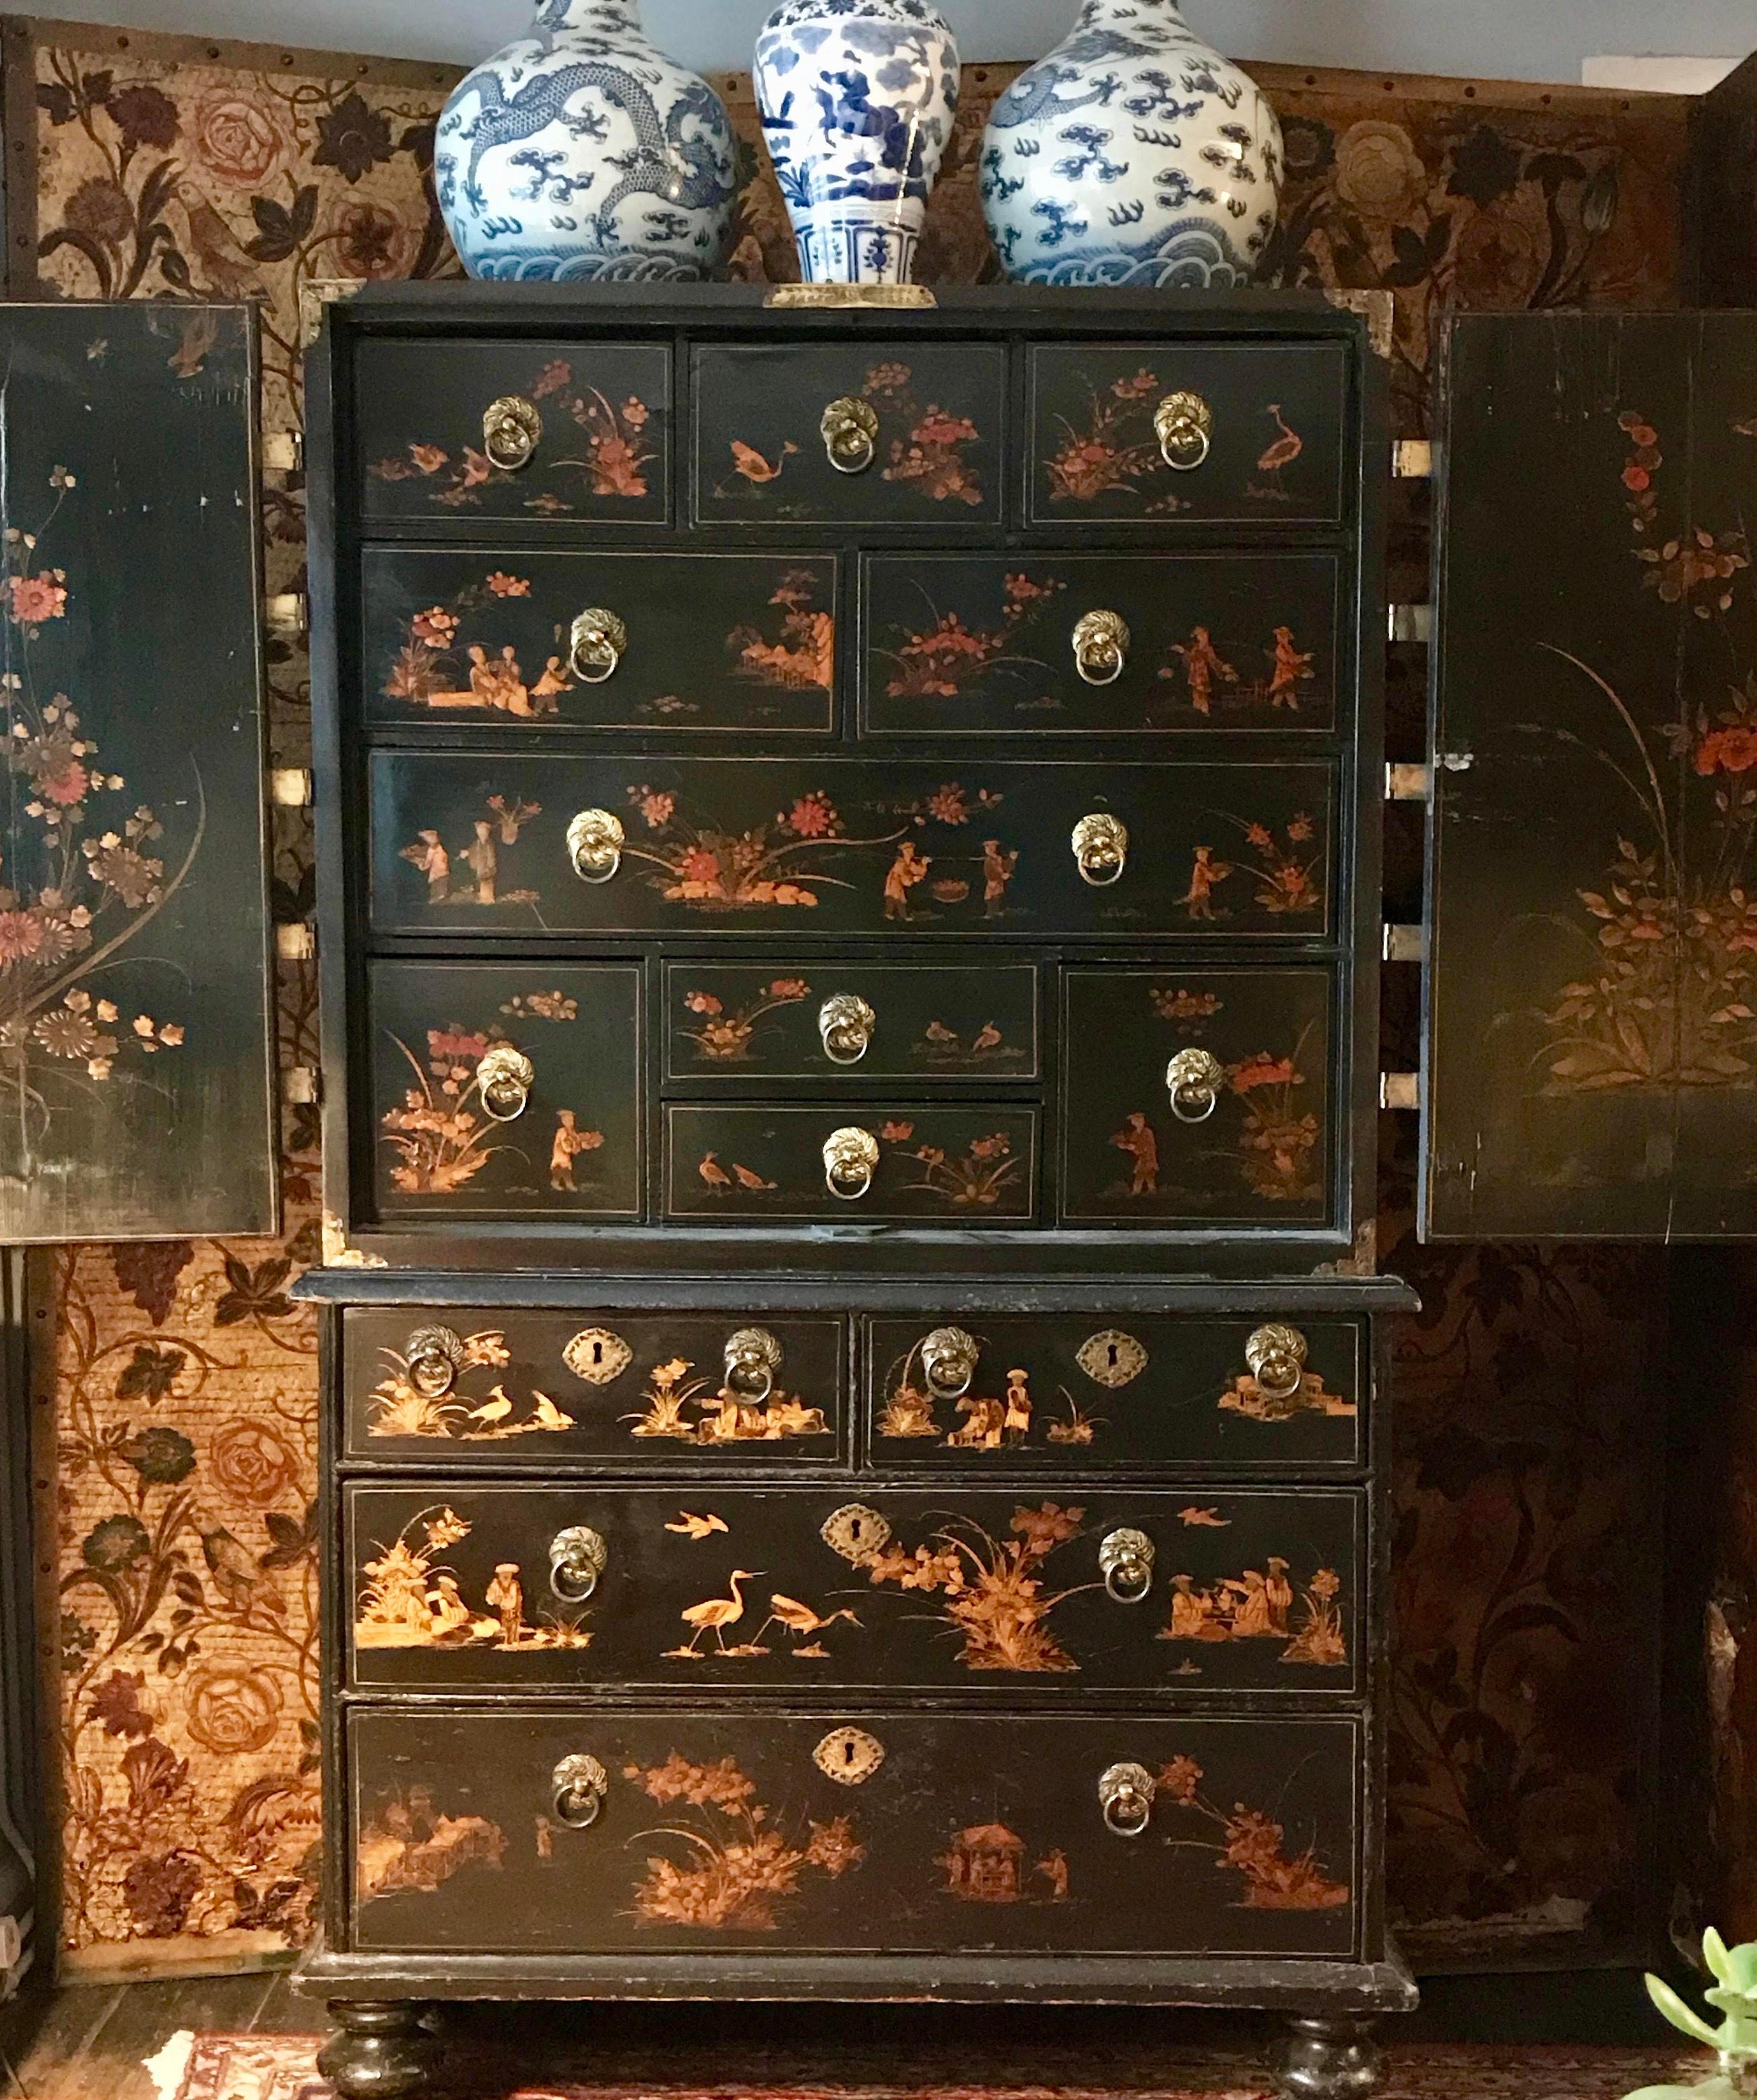 William and Mary William & Mary period japanned/ lacquer cabinet - RESERVED